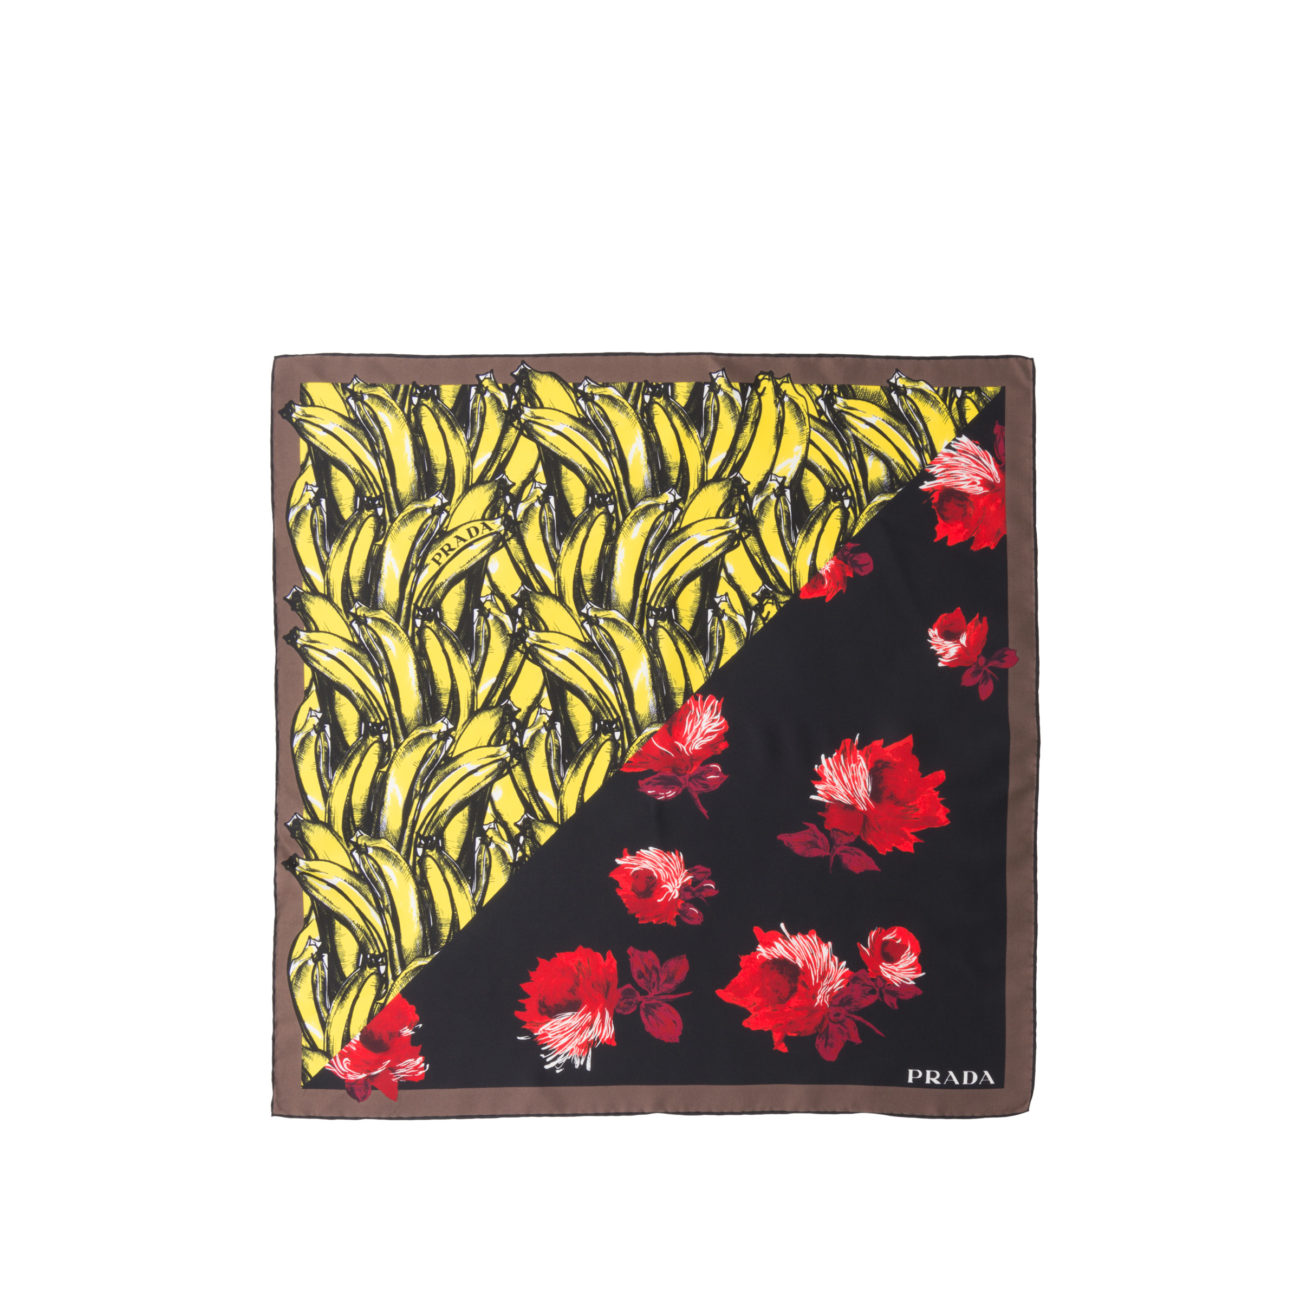 Prada foulards and scarves collection